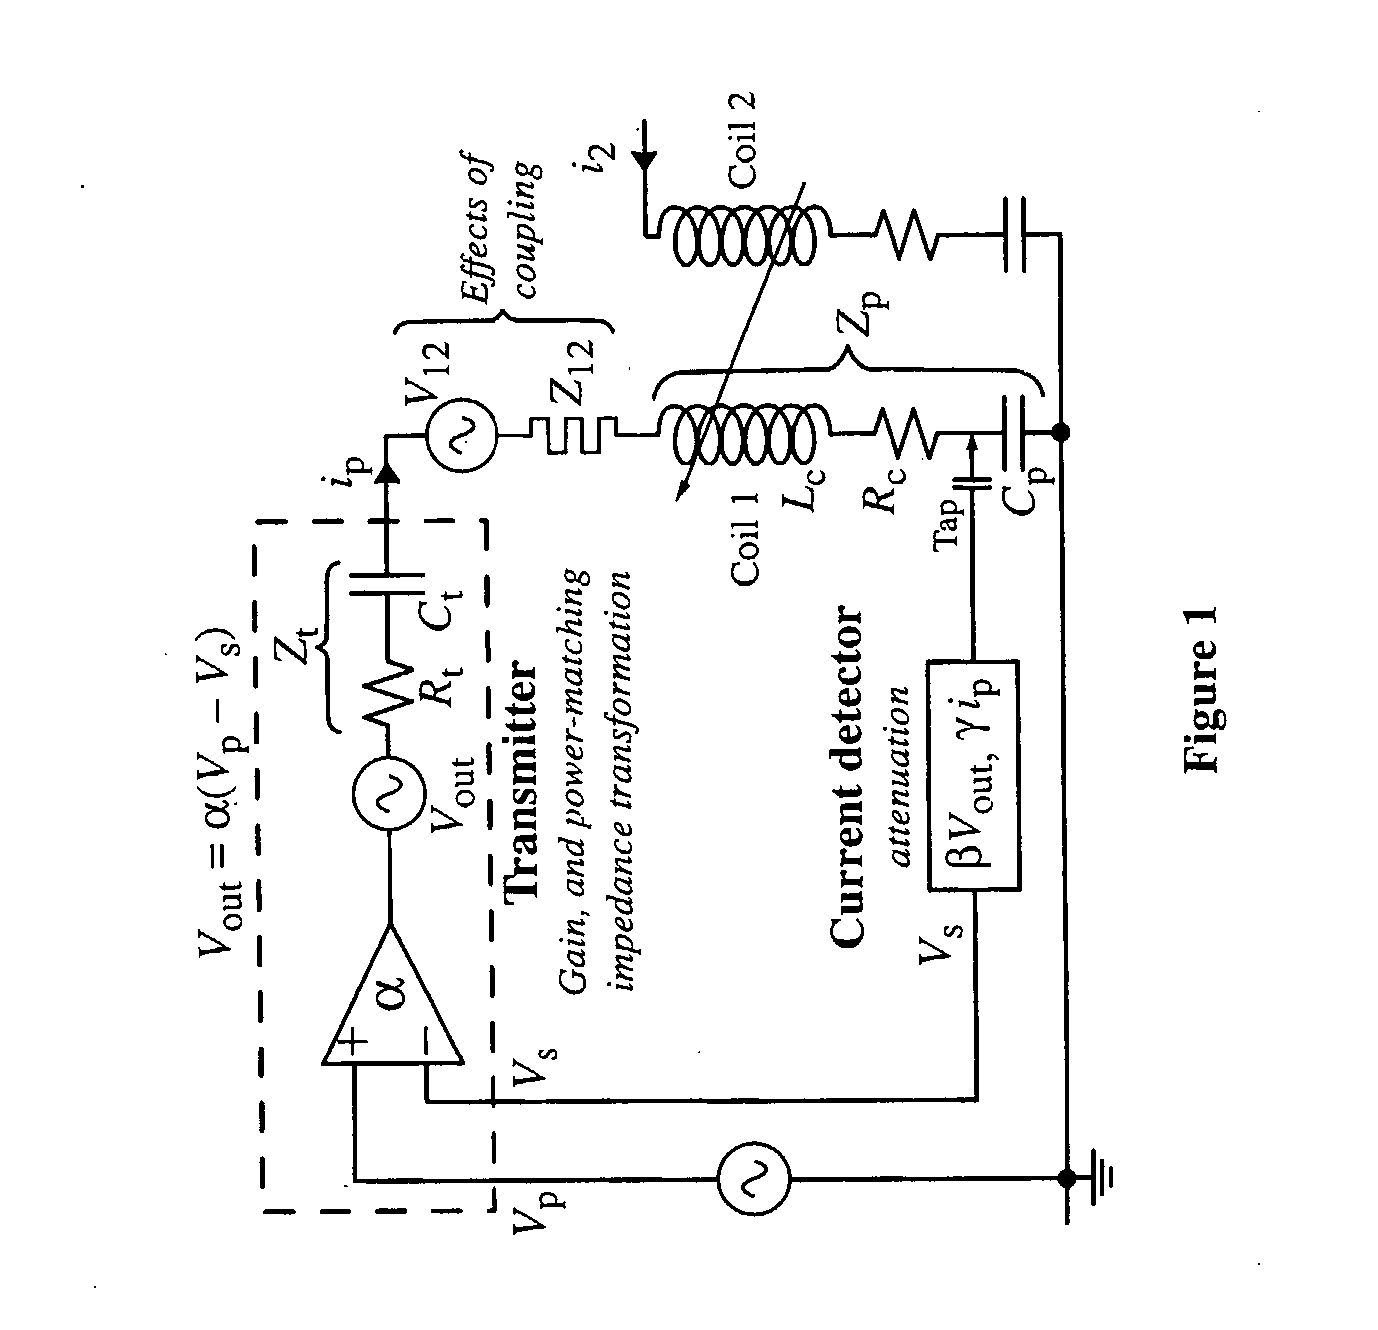 Method of Effecting Nuclear Magnetic Resonance Experiments Using Cartesian Feedback